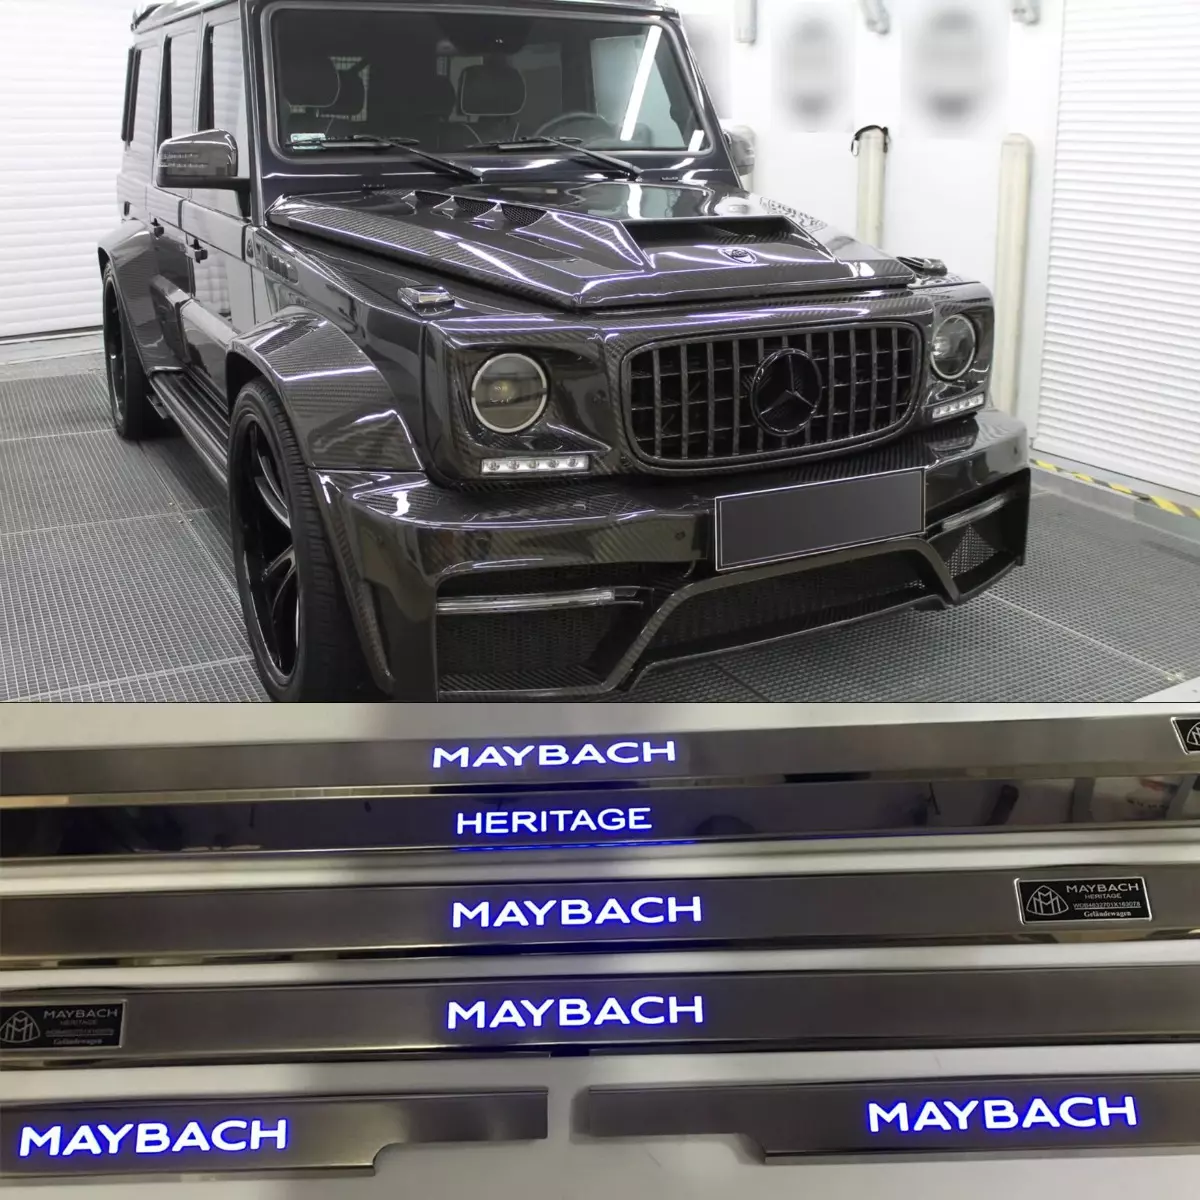 Maybach Heritage LED Door Sills Stainless Steel Set 5 pcs for Mercedes W463 G-Class